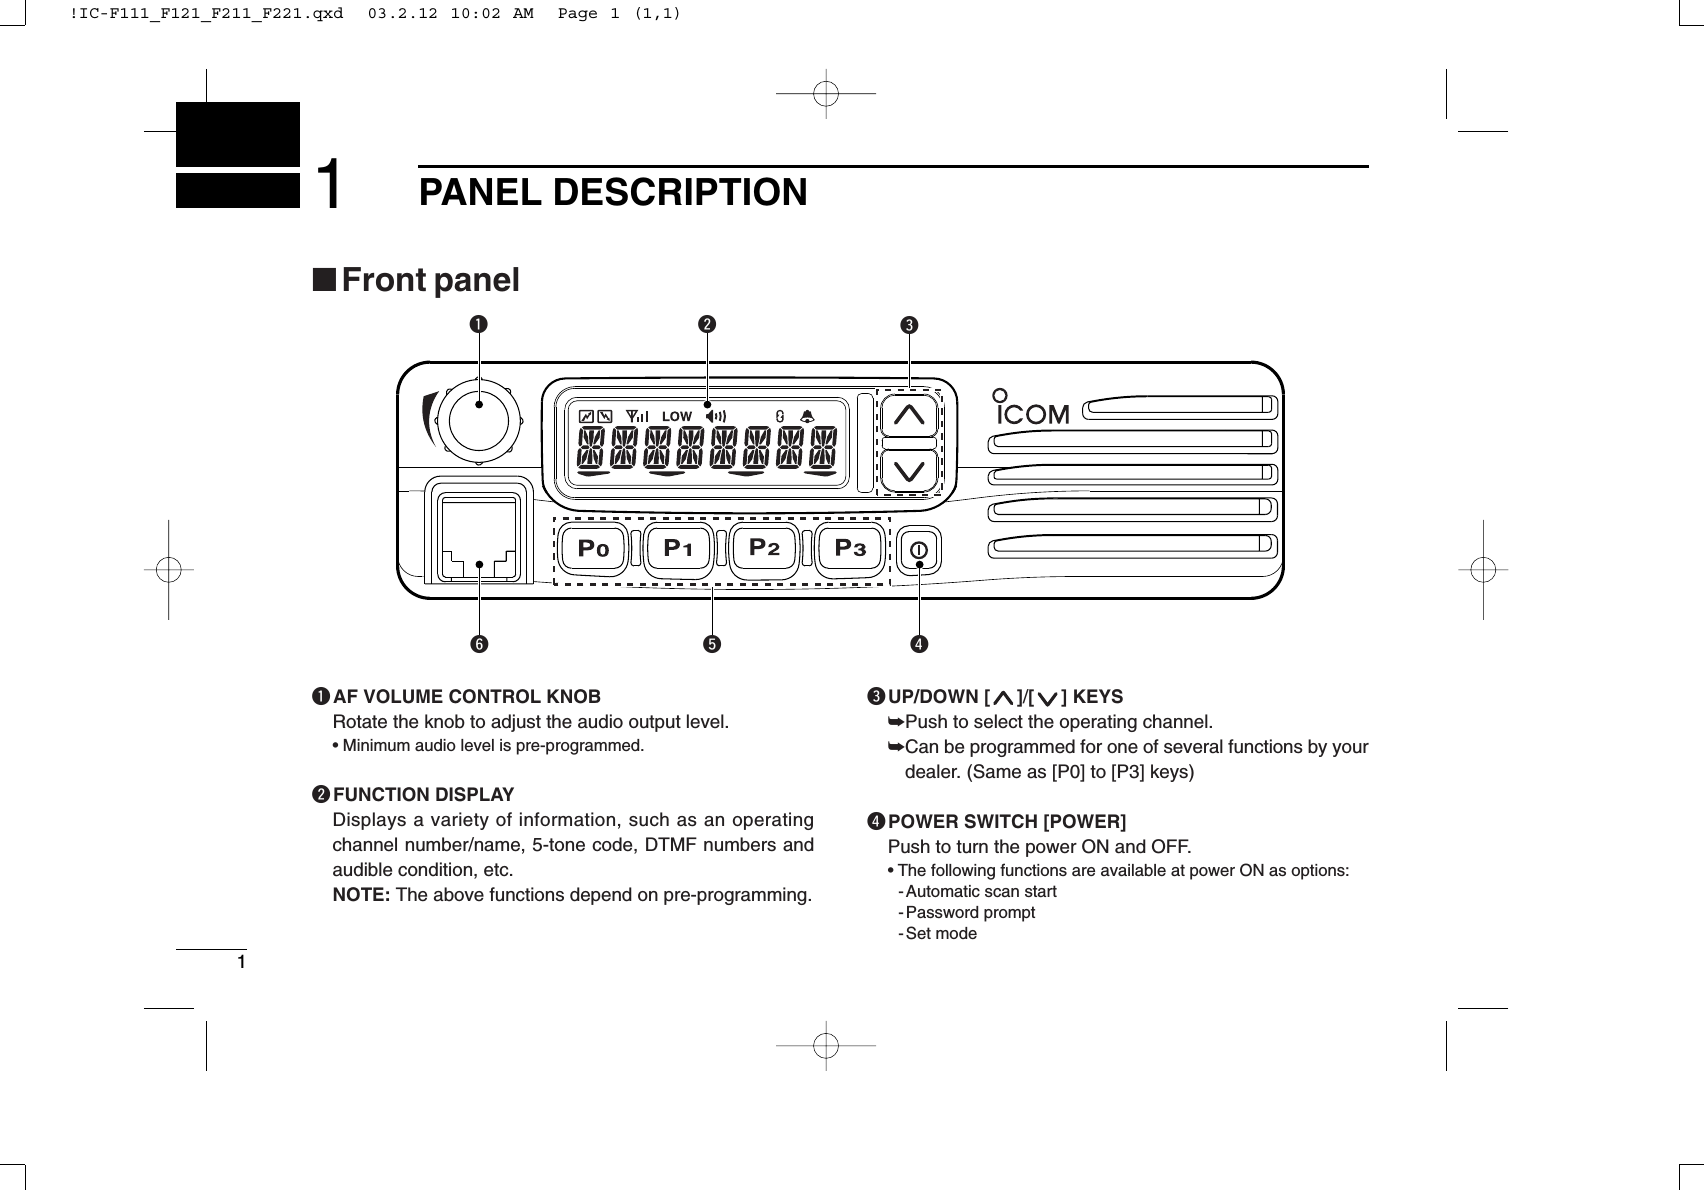 11PANEL DESCRIPTIONytrqwe■Front panelqAF VOLUME CONTROL KNOBRotate the knob to adjust the audio output level.• Minimum audio level is pre-programmed.wFUNCTION DISPLAYDisplays a variety of information, such as an operatingchannel number/name, 5-tone code, DTMF numbers andaudible condition, etc.NOTE: The above functions depend on pre-programming.eUP/DOWN [ ]/[ ] KEYS➥Push to select the operating channel.➥Can be programmed for one of several functions by yourdealer. (Same as [P0] to [P3] keys)rPOWER SWITCH [POWER]Push to turn the power ON and OFF.• The following functions are available at power ON as options:- Automatic scan start- Password prompt- Set mode!IC-F111_F121_F211_F221.qxd  03.2.12 10:02 AM  Page 1 (1,1)